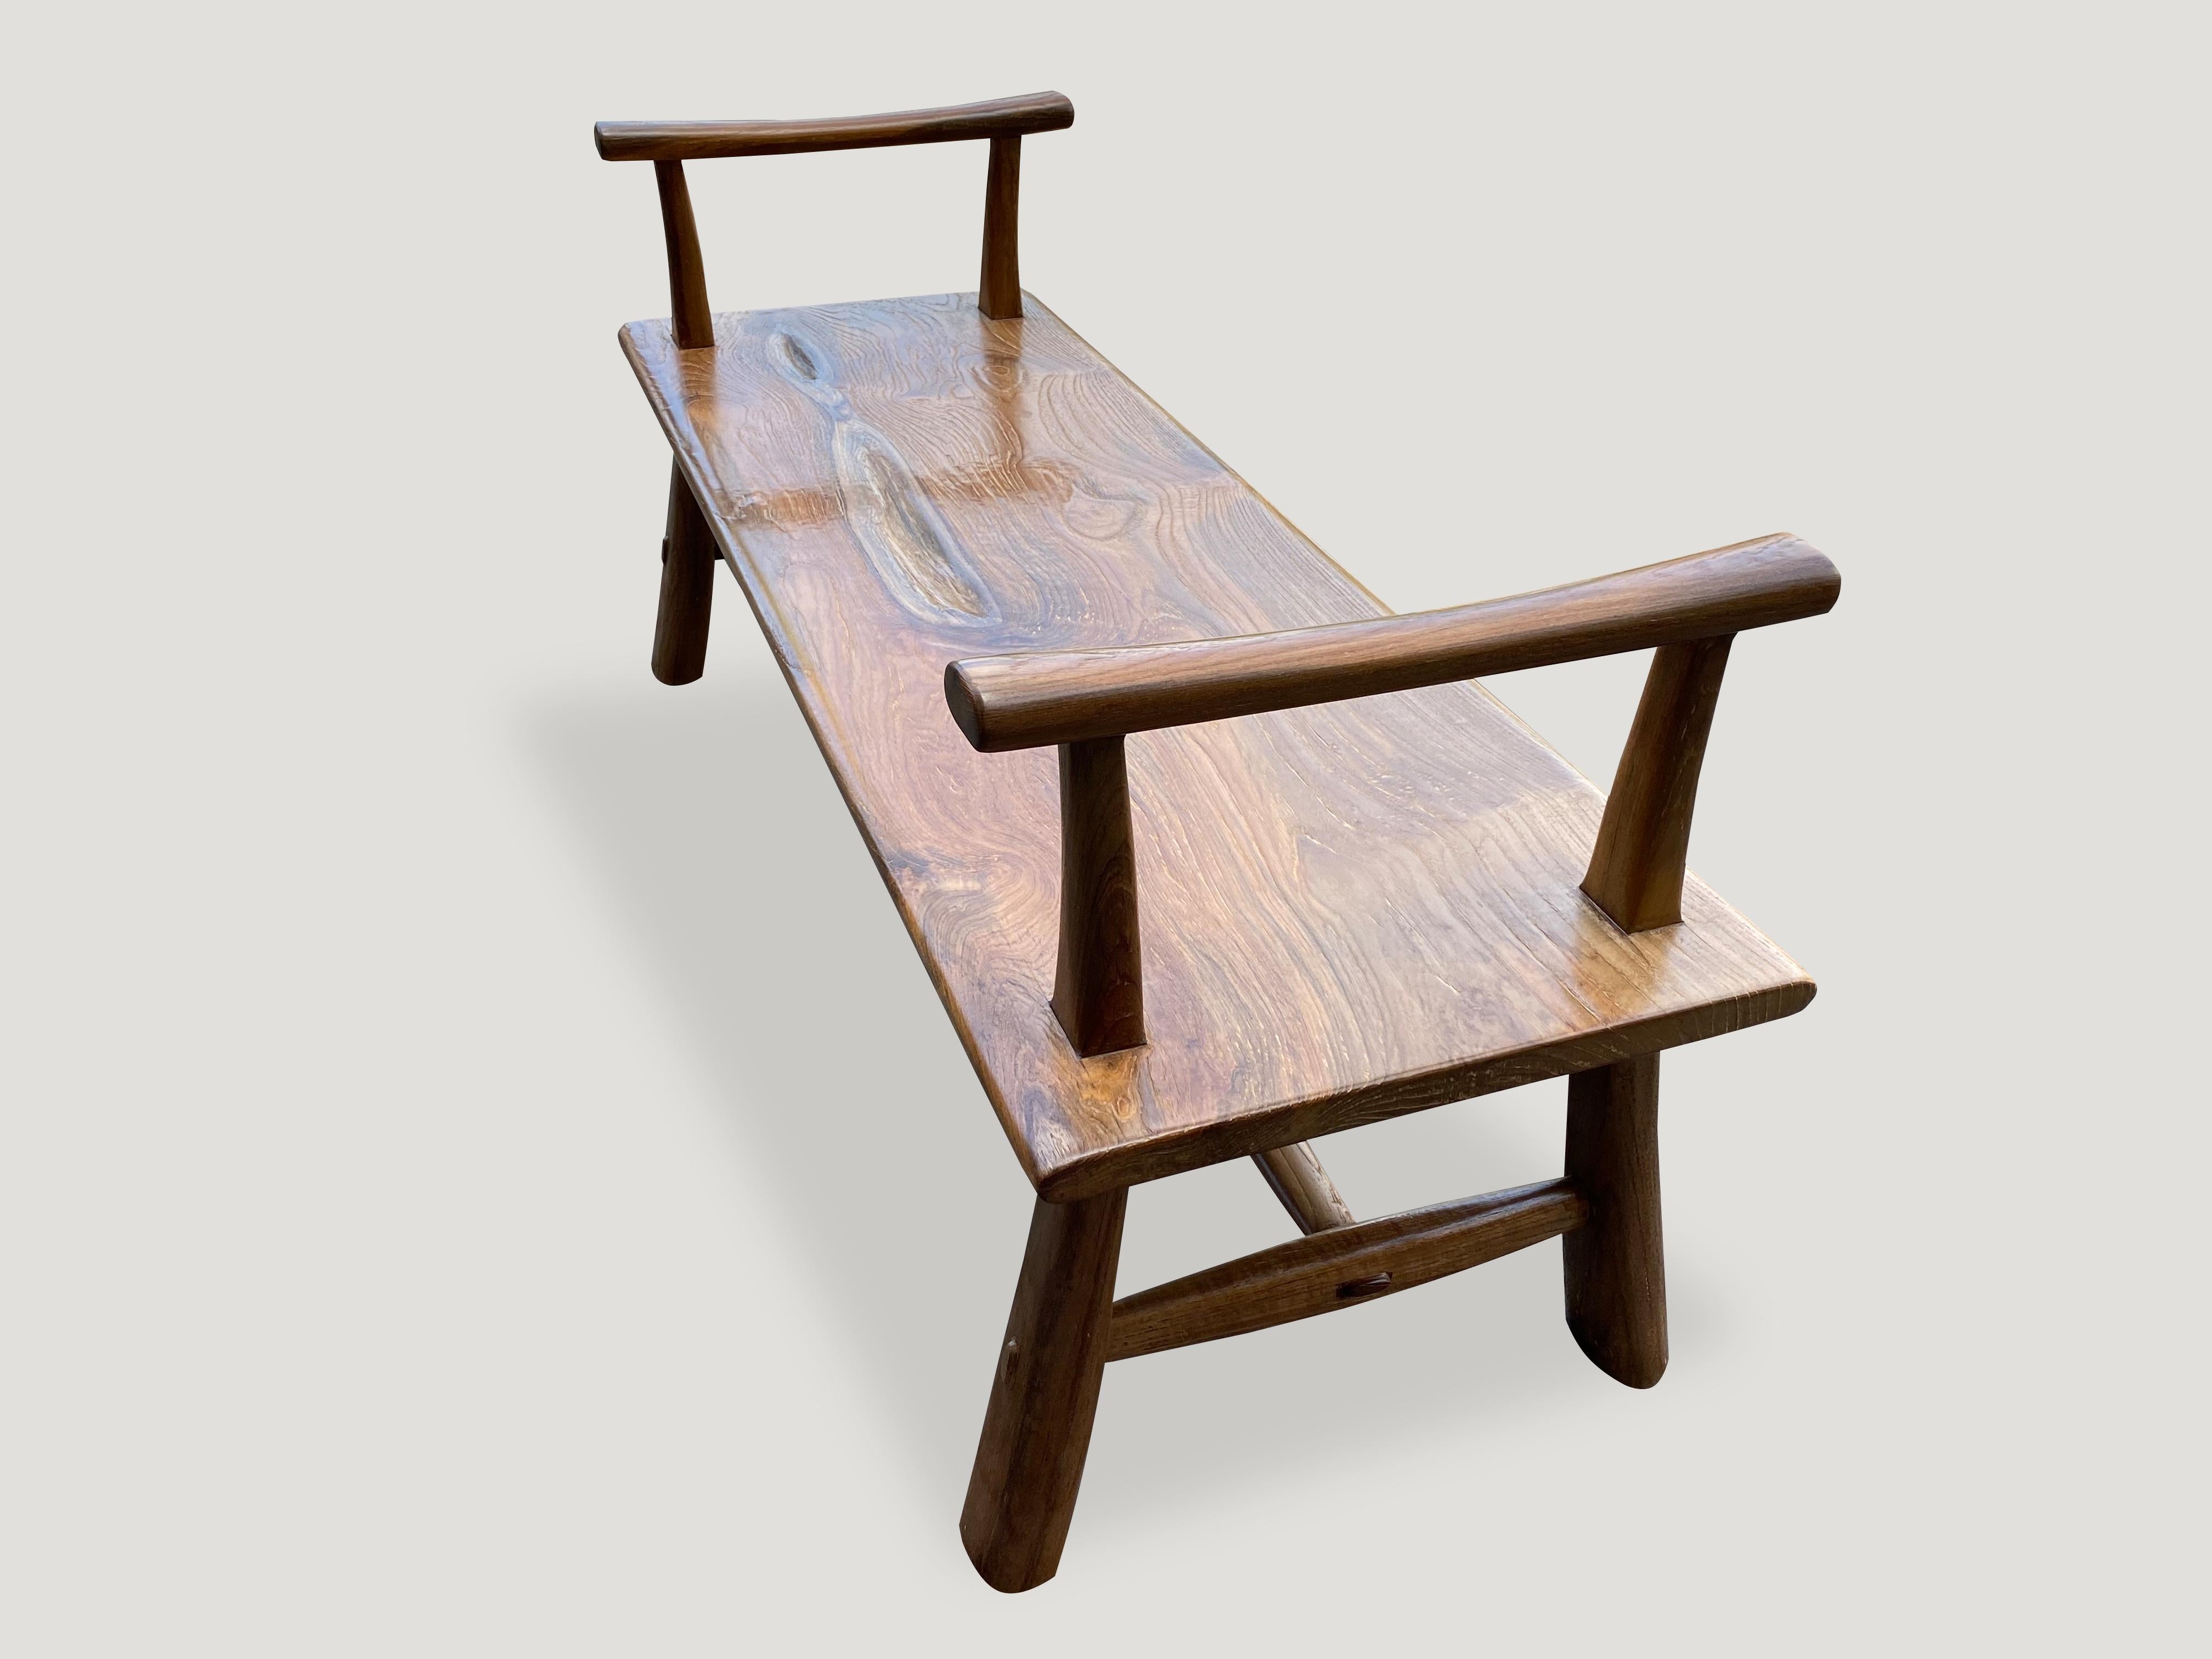 Andrianna Shamaris Teak Wood Single Slab Bench with Arms For Sale 1